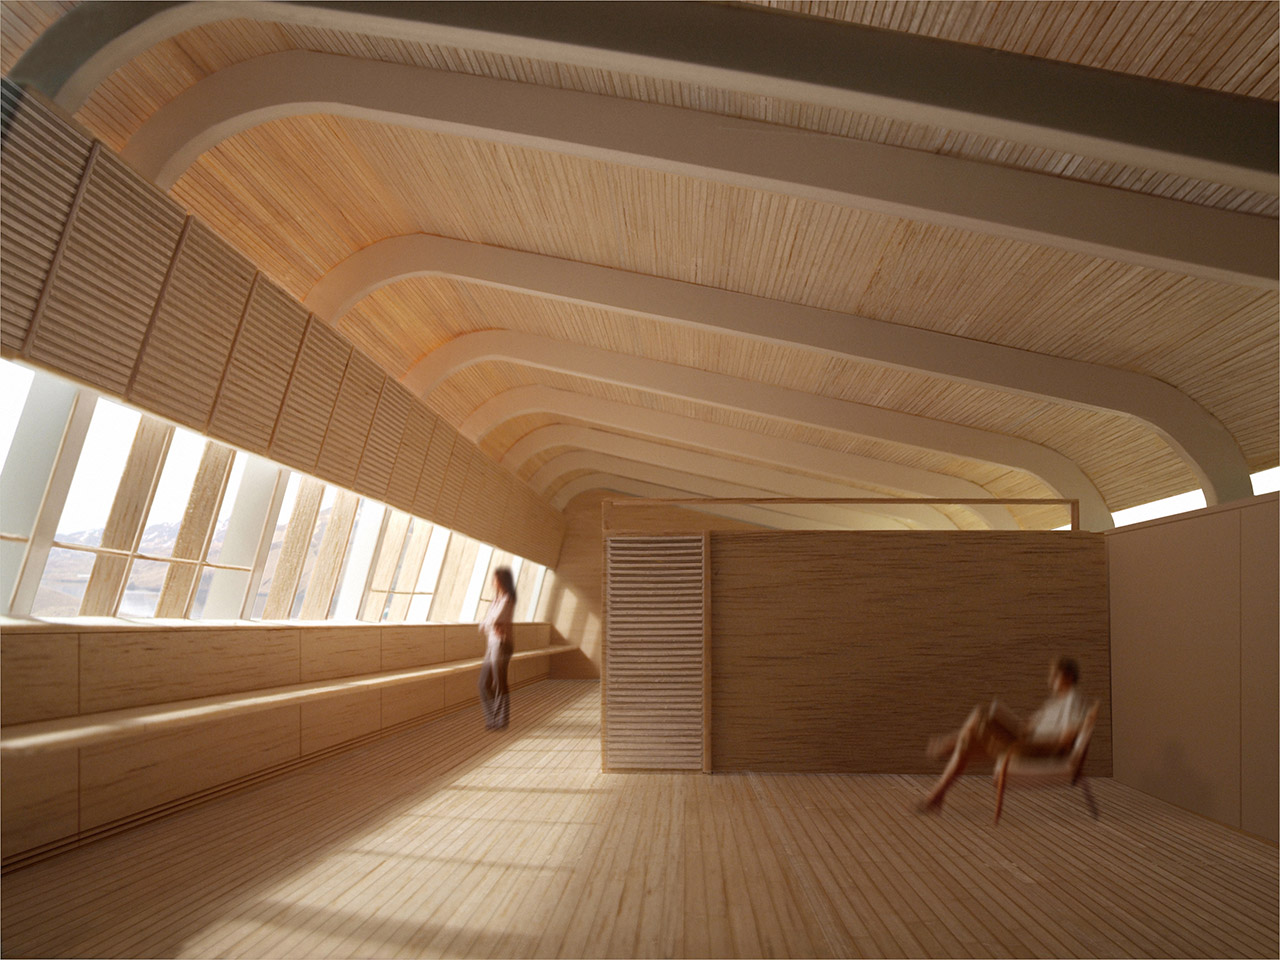 Interior of Finnesko 13 by Taller Abierto, winner of the Living Aleutian Home Design Competition 2012